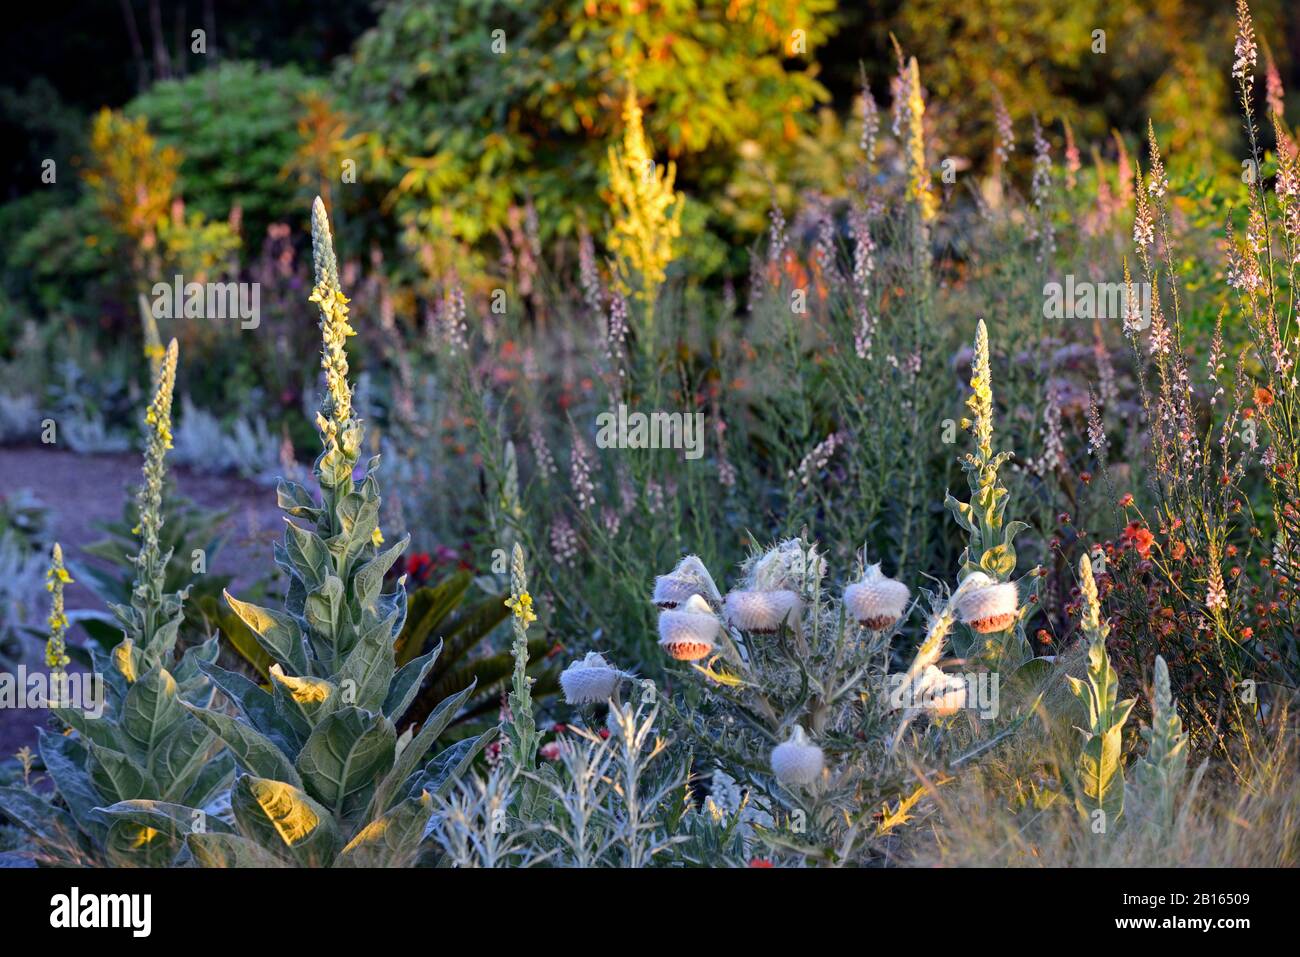 Verbascum thapsus,great mullein,common mullein,flower spikes,spires,Cirsium eriophorum,woolly thistle,herbaceous biennial,giant thistles,ornamental th Stock Photo